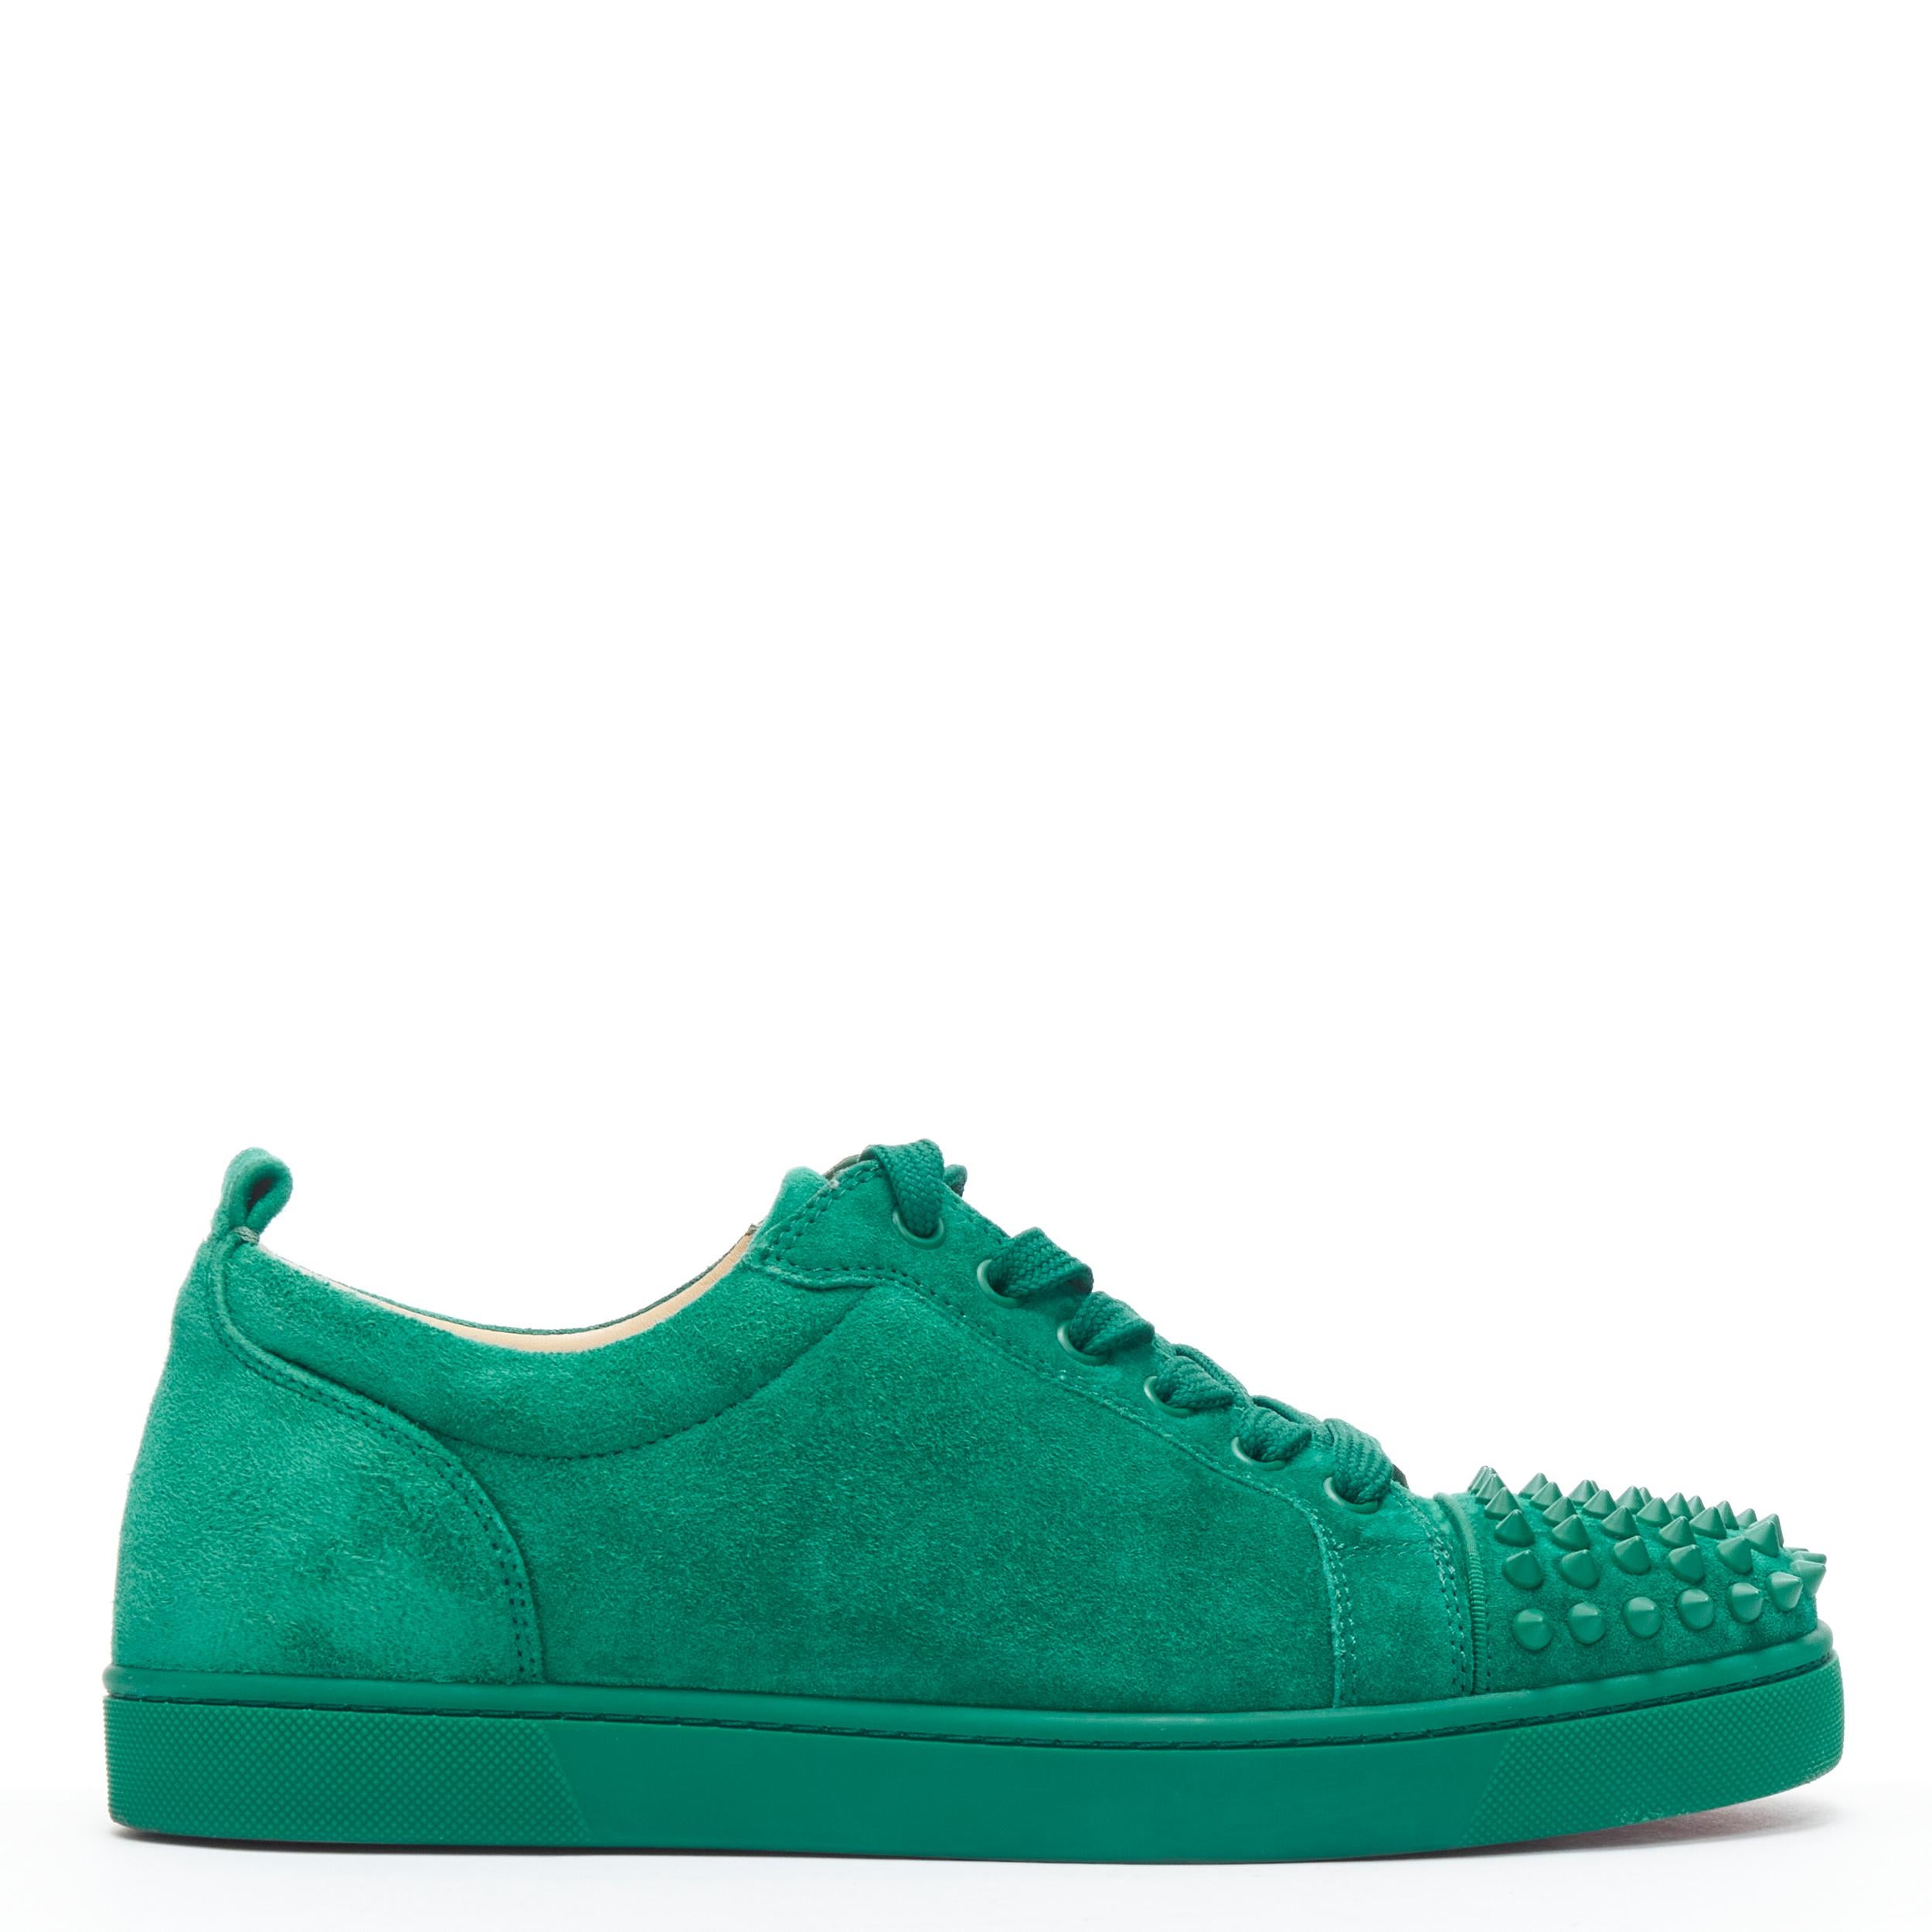 CHRISTIAN LOUBOUTIN Junior Spike Orlato Kelly green studded toe low sneaker EU41 
Reference: TGAS/B01456 
Brand: Christian Louboutin 
Designer: Christian Louboutin 
Model: Junior Spike Orlato 
Material: Suede 
Color: Green 
Pattern: Solid 
Closure: